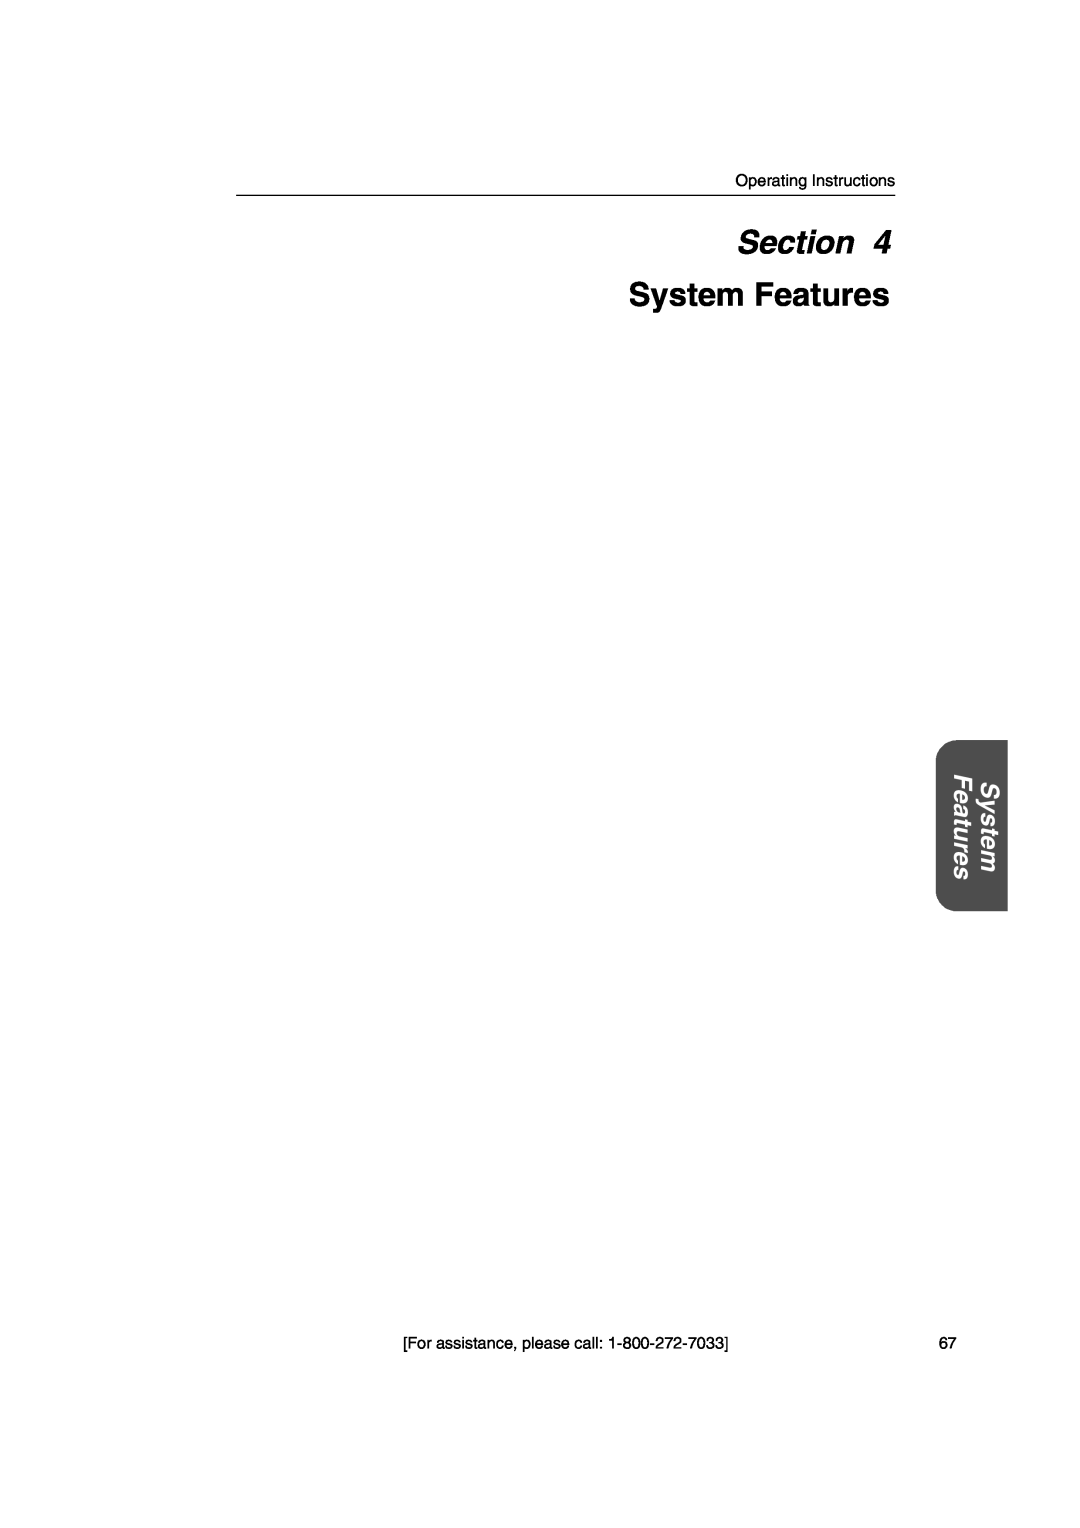 Panasonic KX-HGW600 manual System Features, Section 